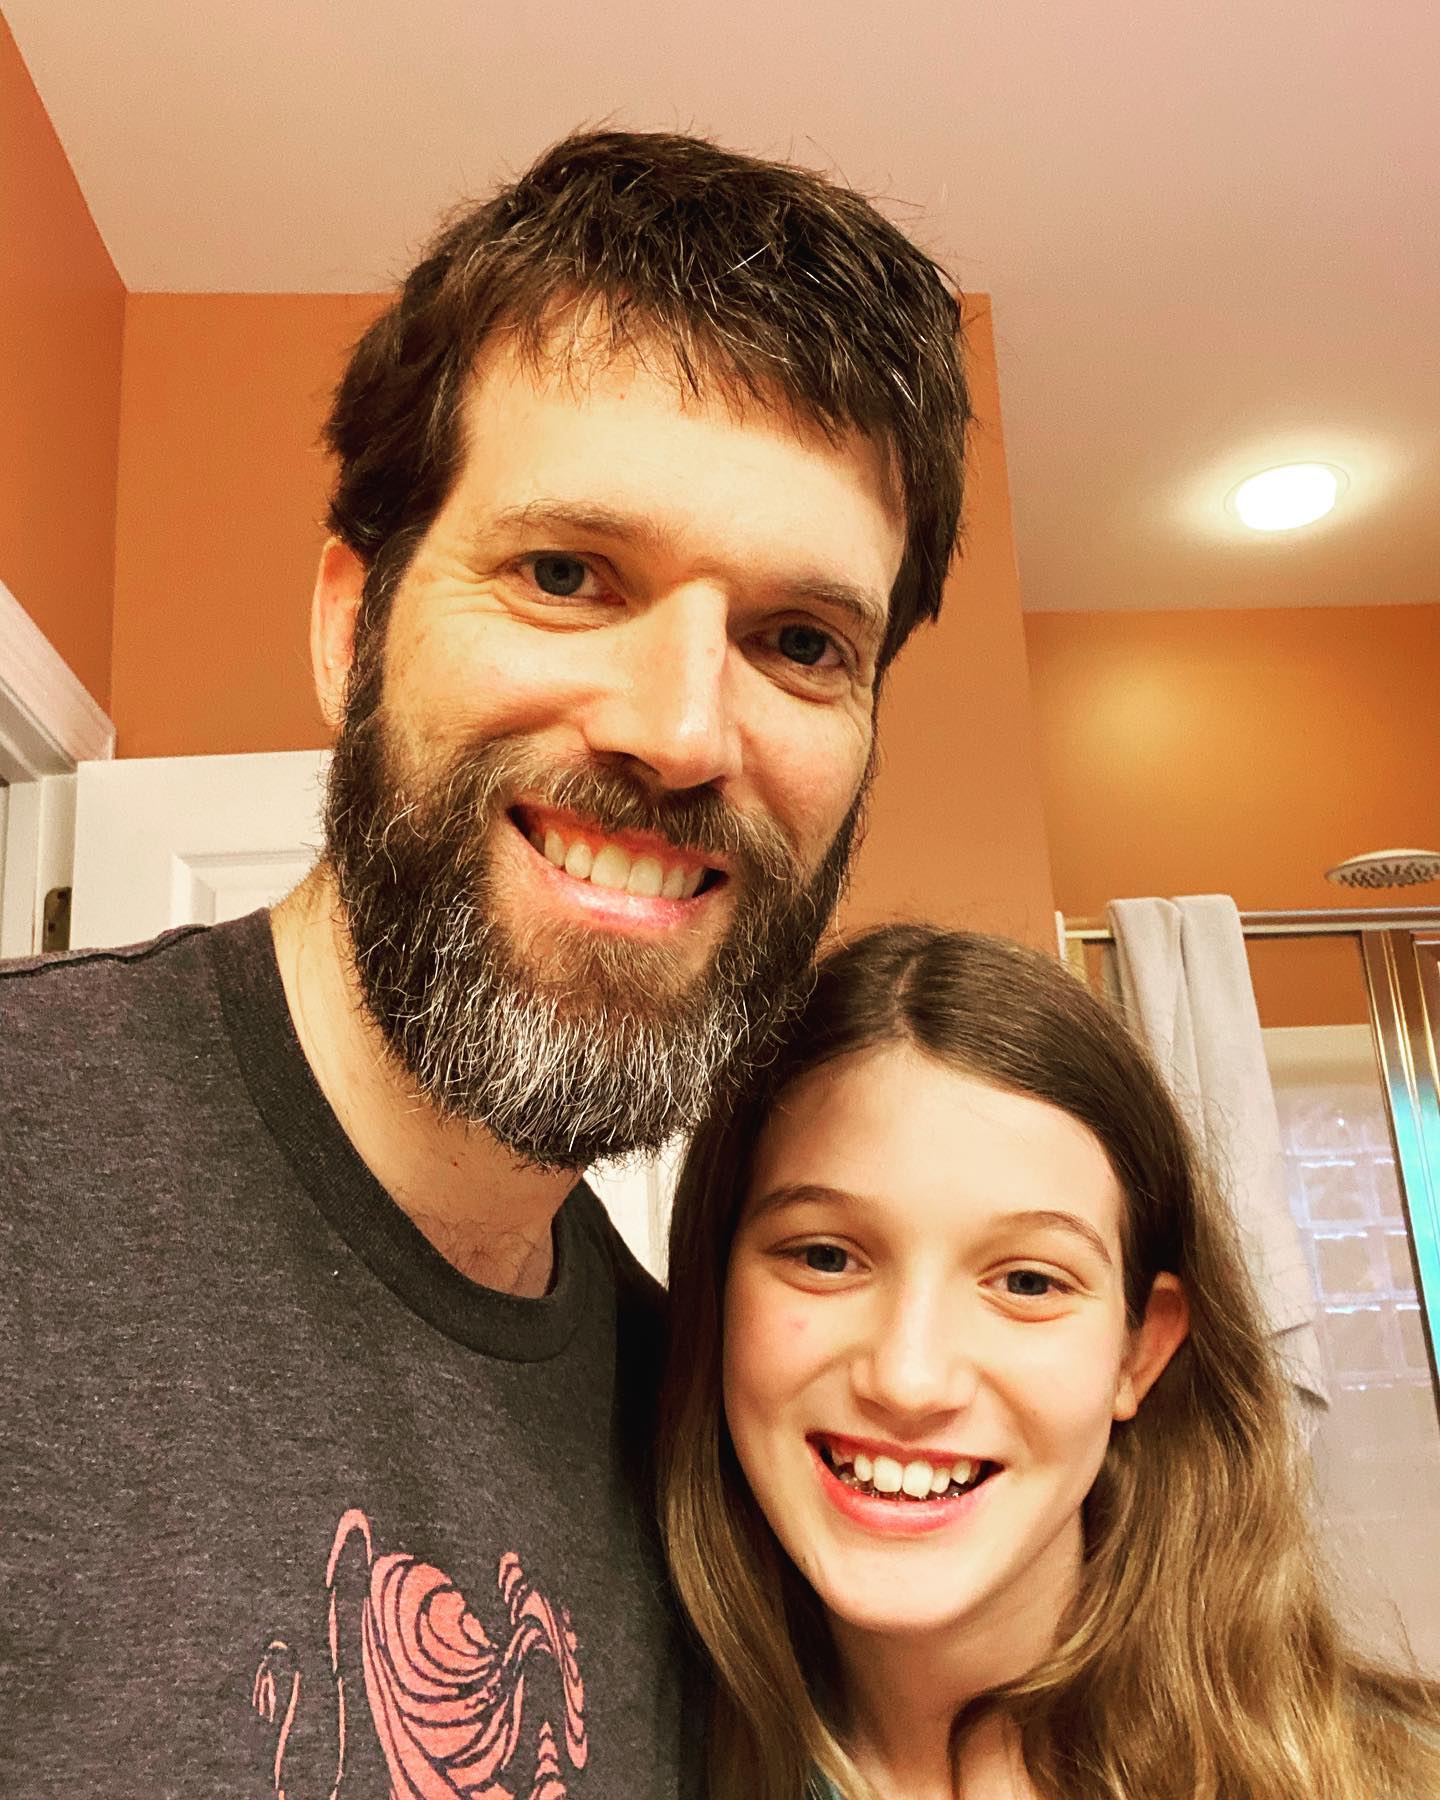 First beard trim in 100 days. Sara even helped out. #family #beard